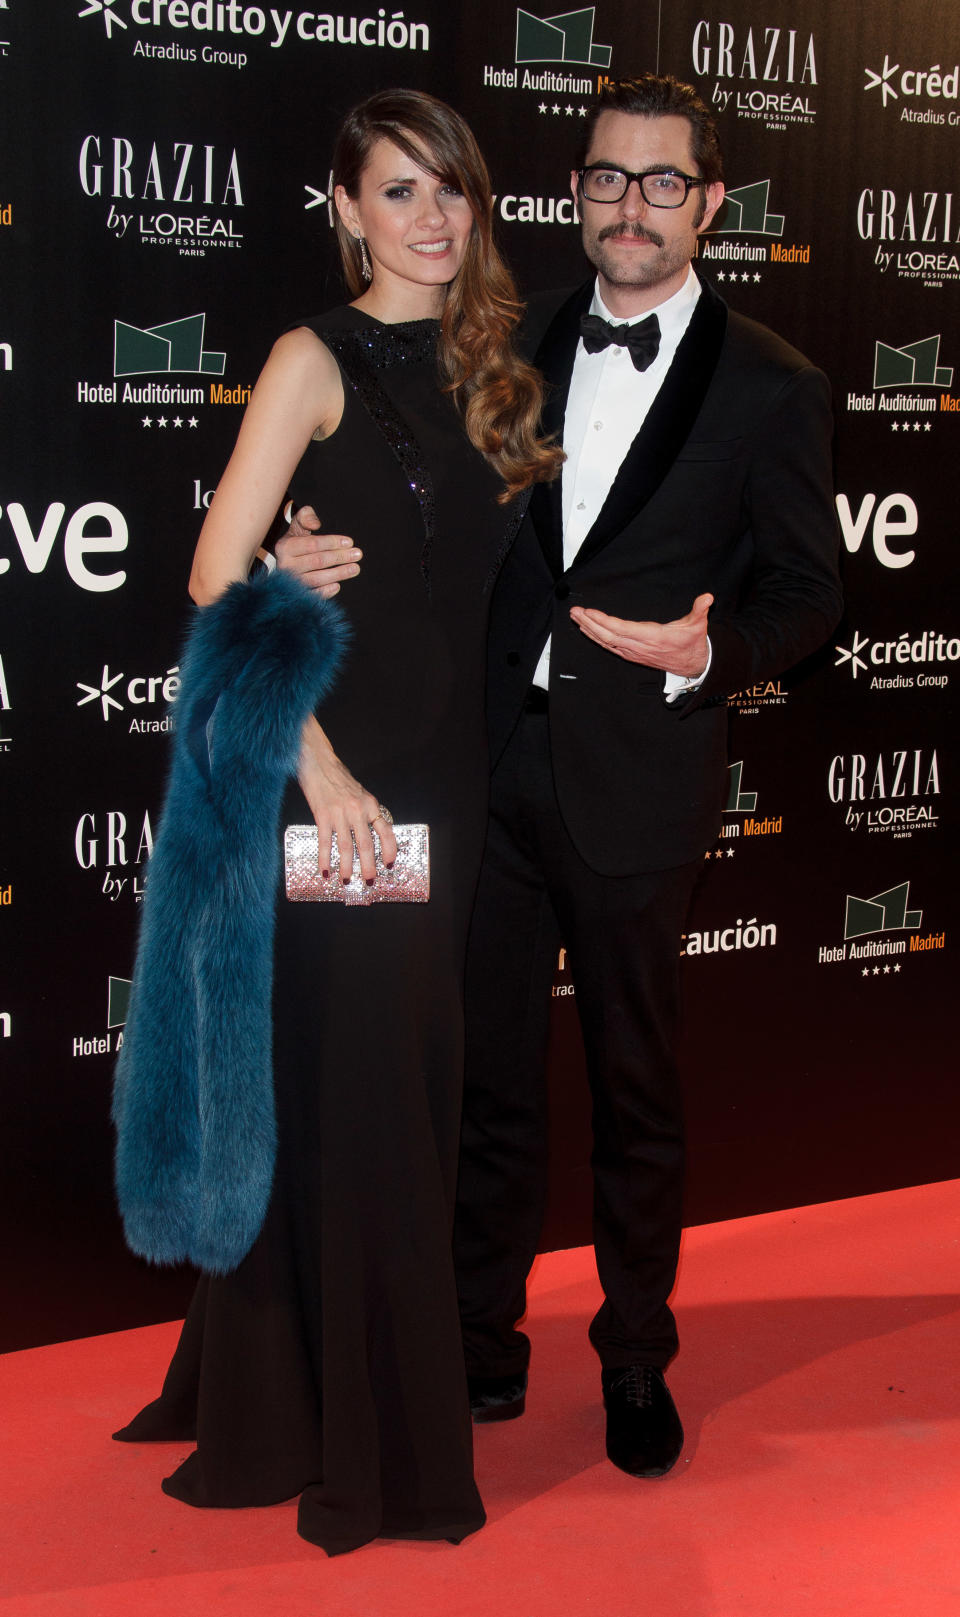 MADRID, SPAIN - FEBRUARY 09:  Actress Elena Ballesteros and Dani Mateo attend Goya Cinema Awards 2014 after party at Centro de Congresos Principe Felipe on February 9, 2014 in Madrid, Spain.  (Photo by Eduardo Parra/WireImage)